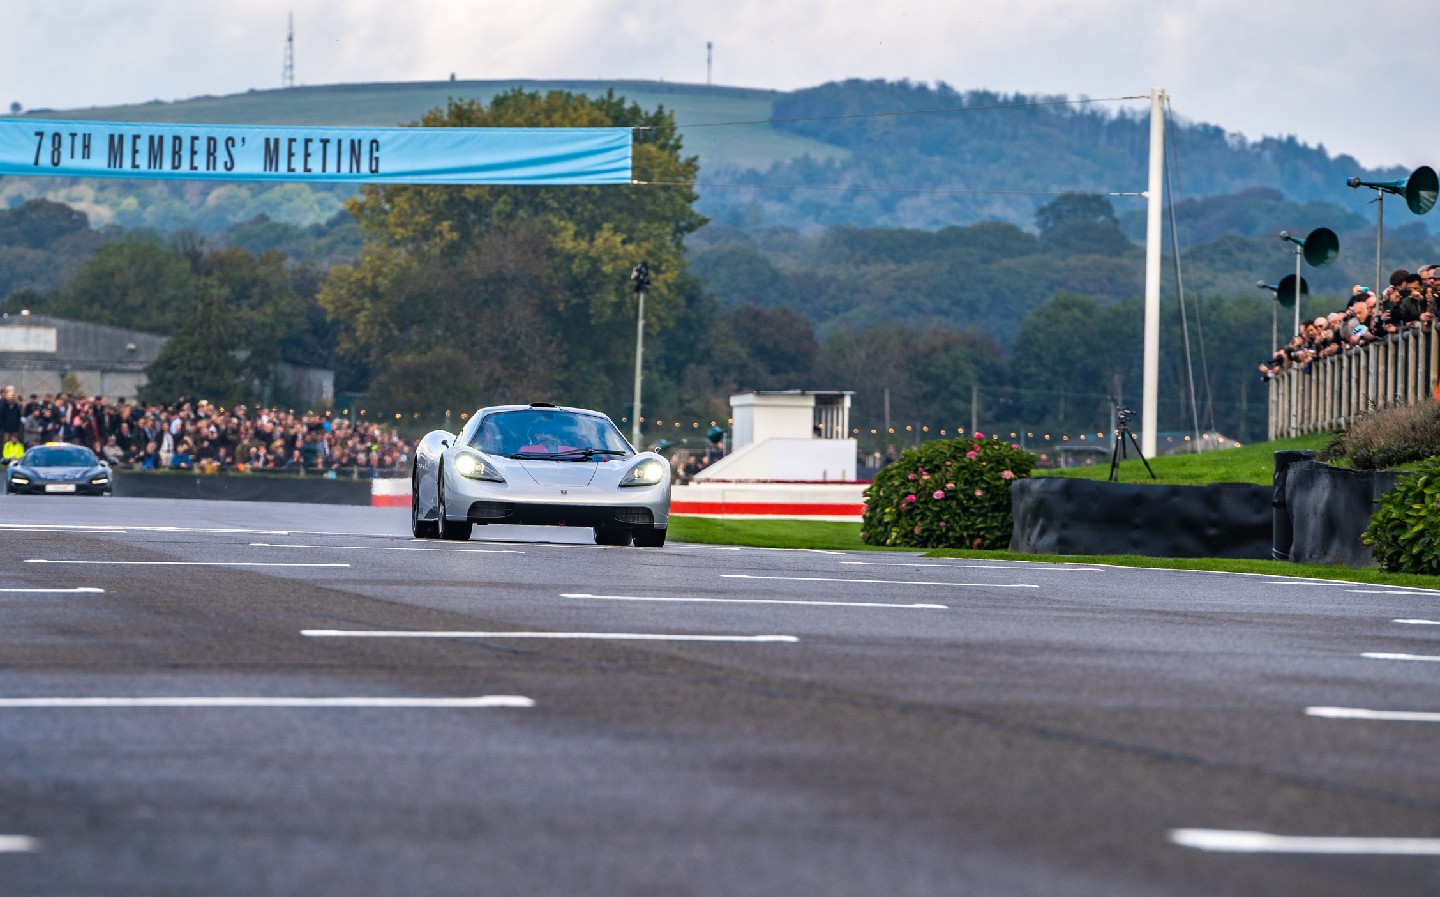 Seeing the Gordon Murray T.50 in action at Goodwood confirms why the £2.4m hypercar is a canny investment